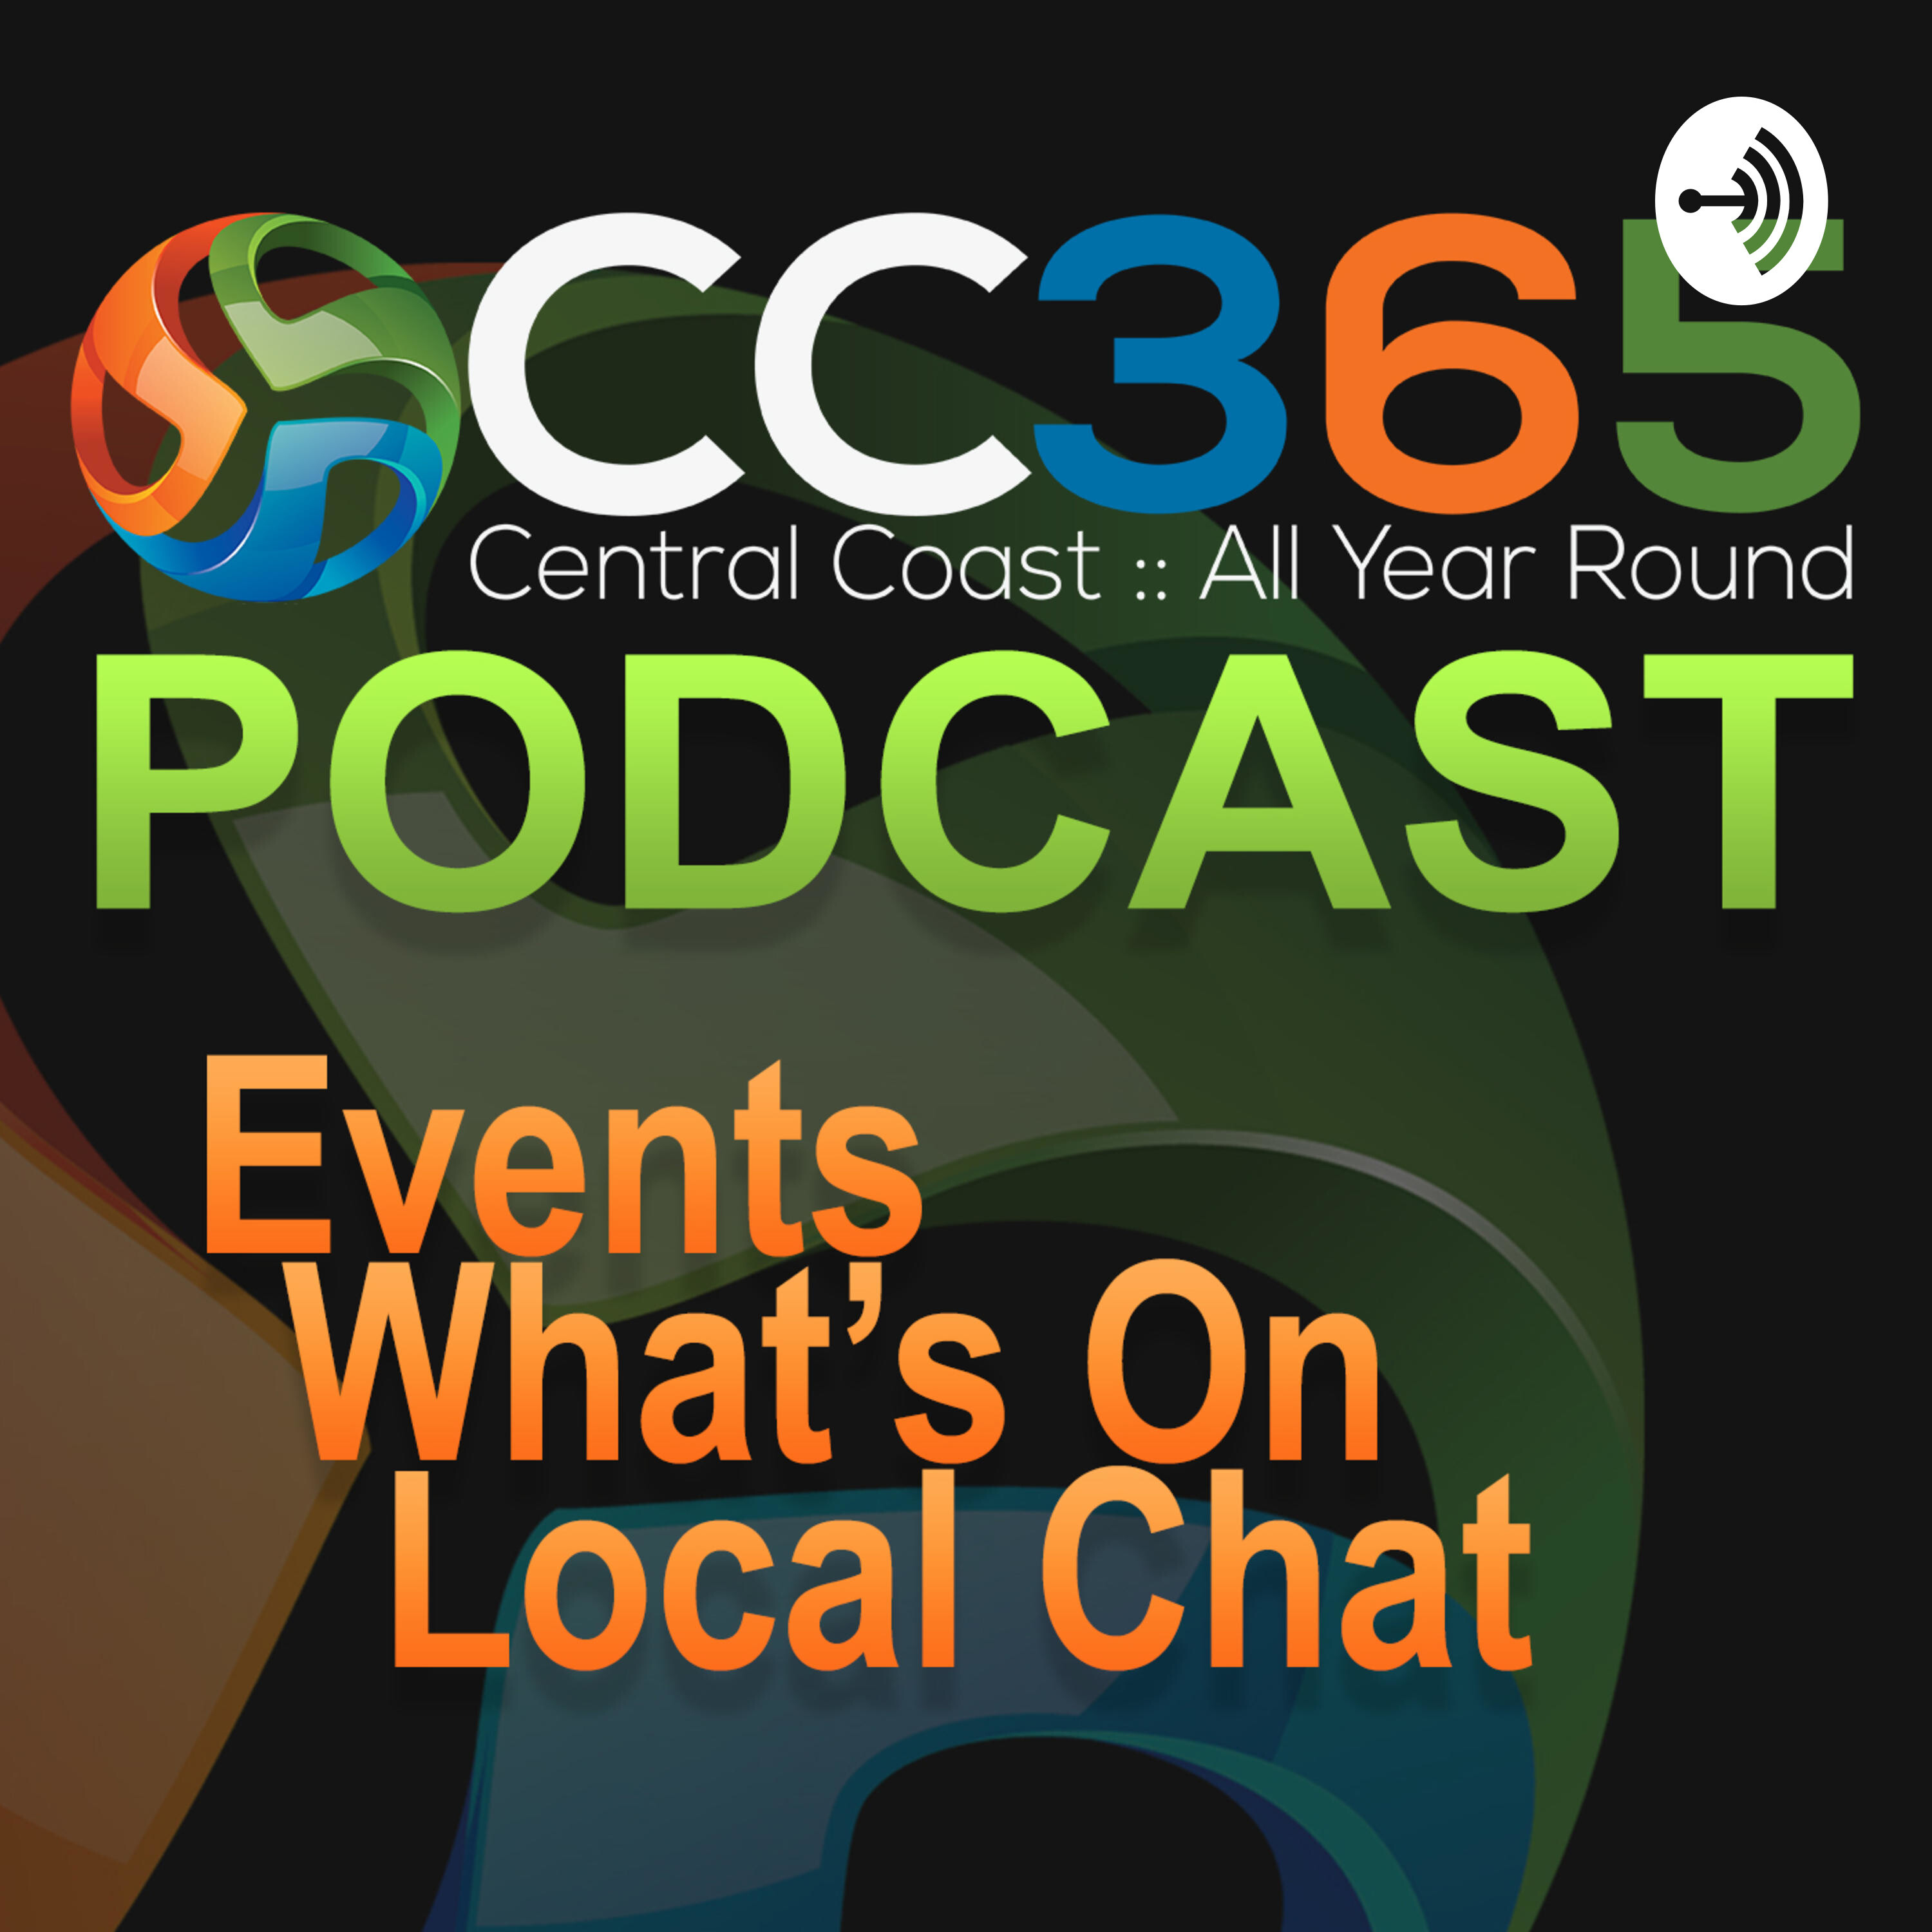 008 CC365 Podcast w/ Andrew Smith of CCAC and Travelling Bushman Co-Host